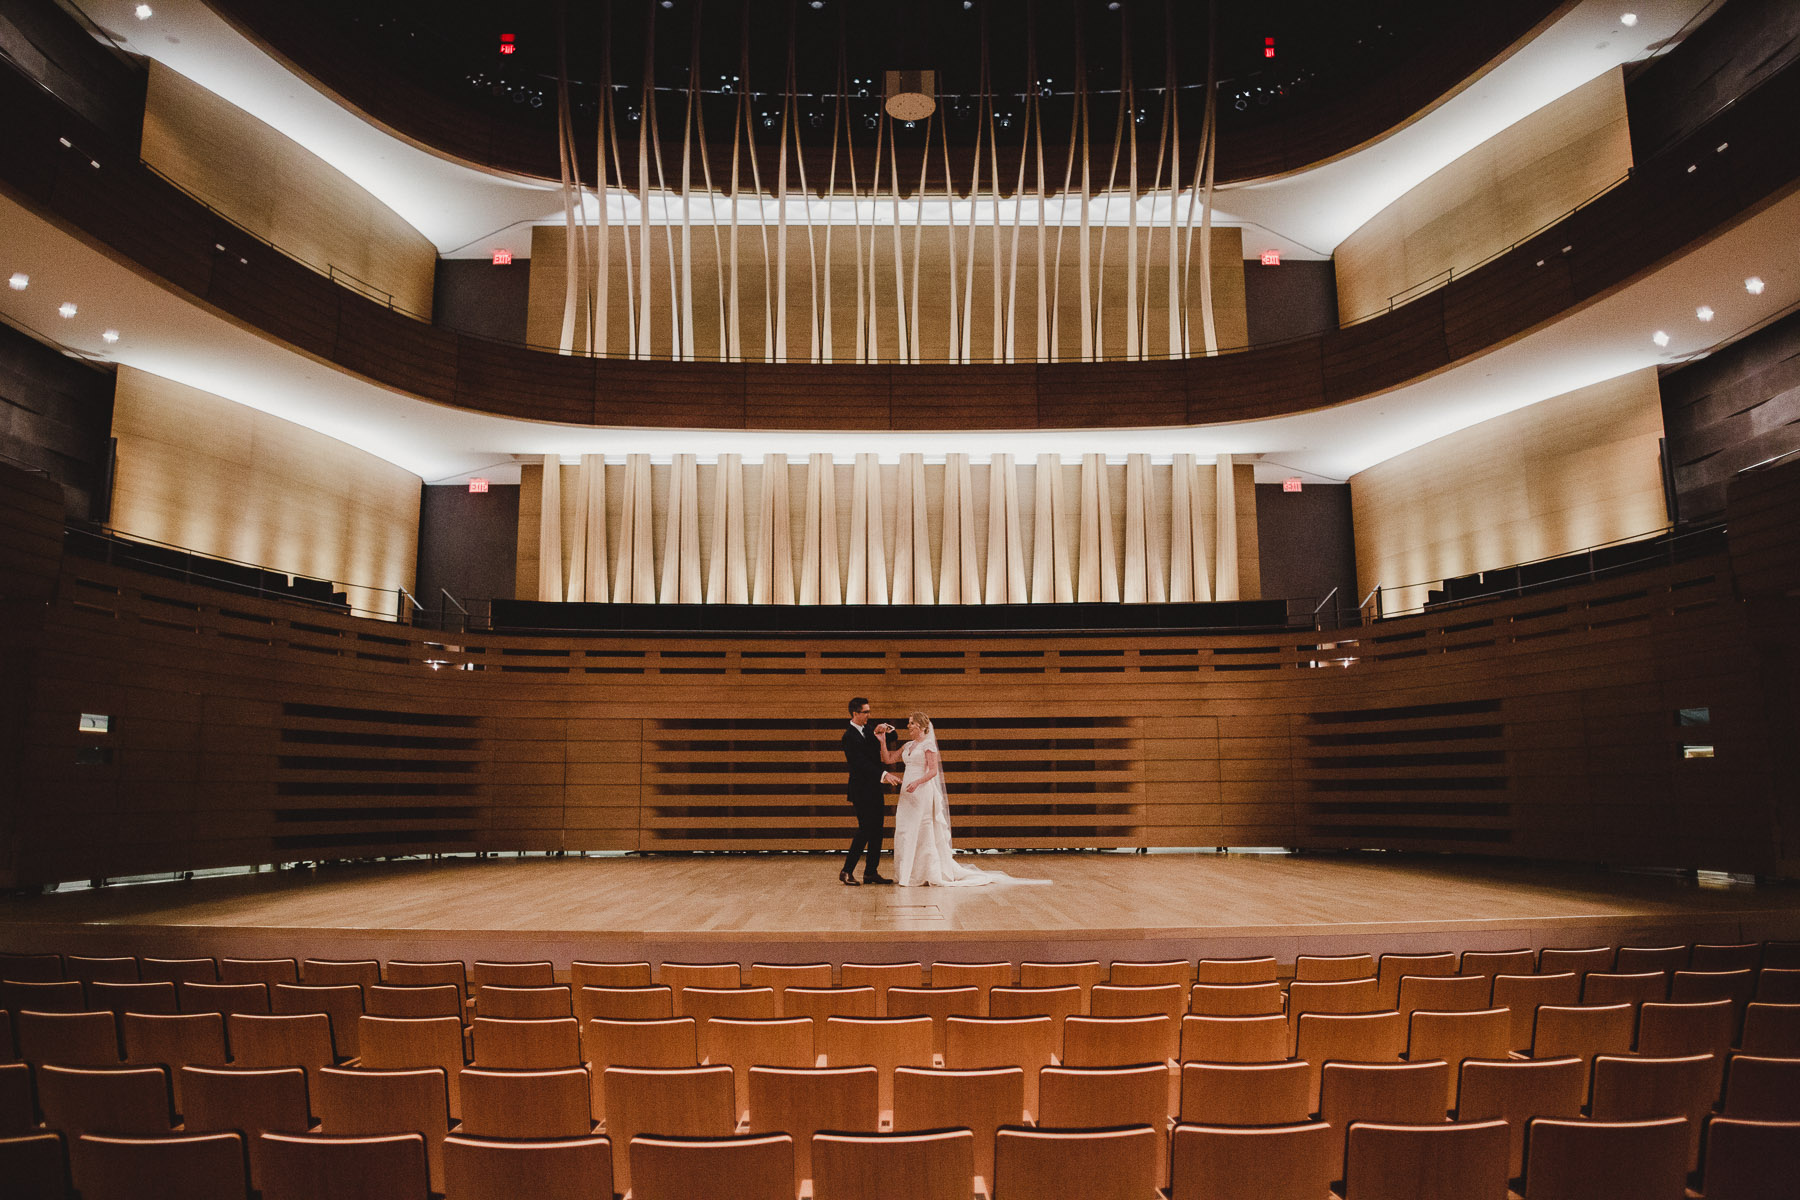 Royal Conservatory Of Music Wedding Pictures by Avangard PhotographyRoyal Conservatory Of Music Wedding Pictures by Avangard Photography